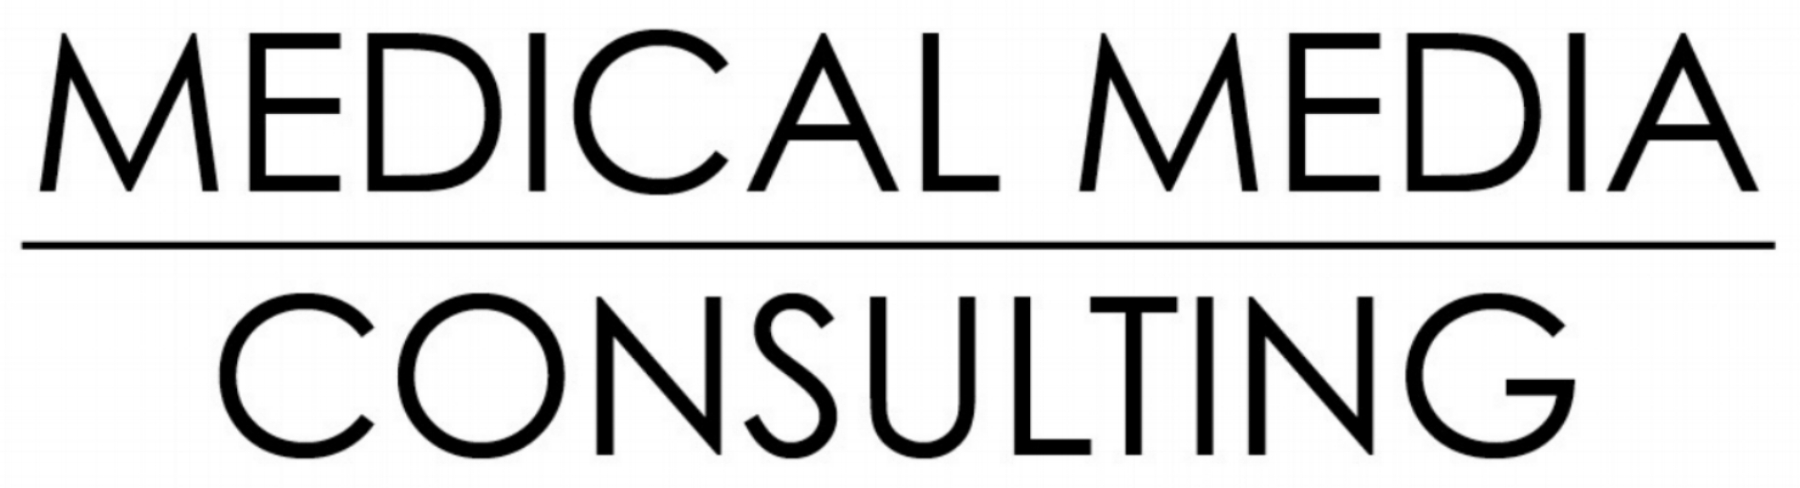 Medical Media Consulting